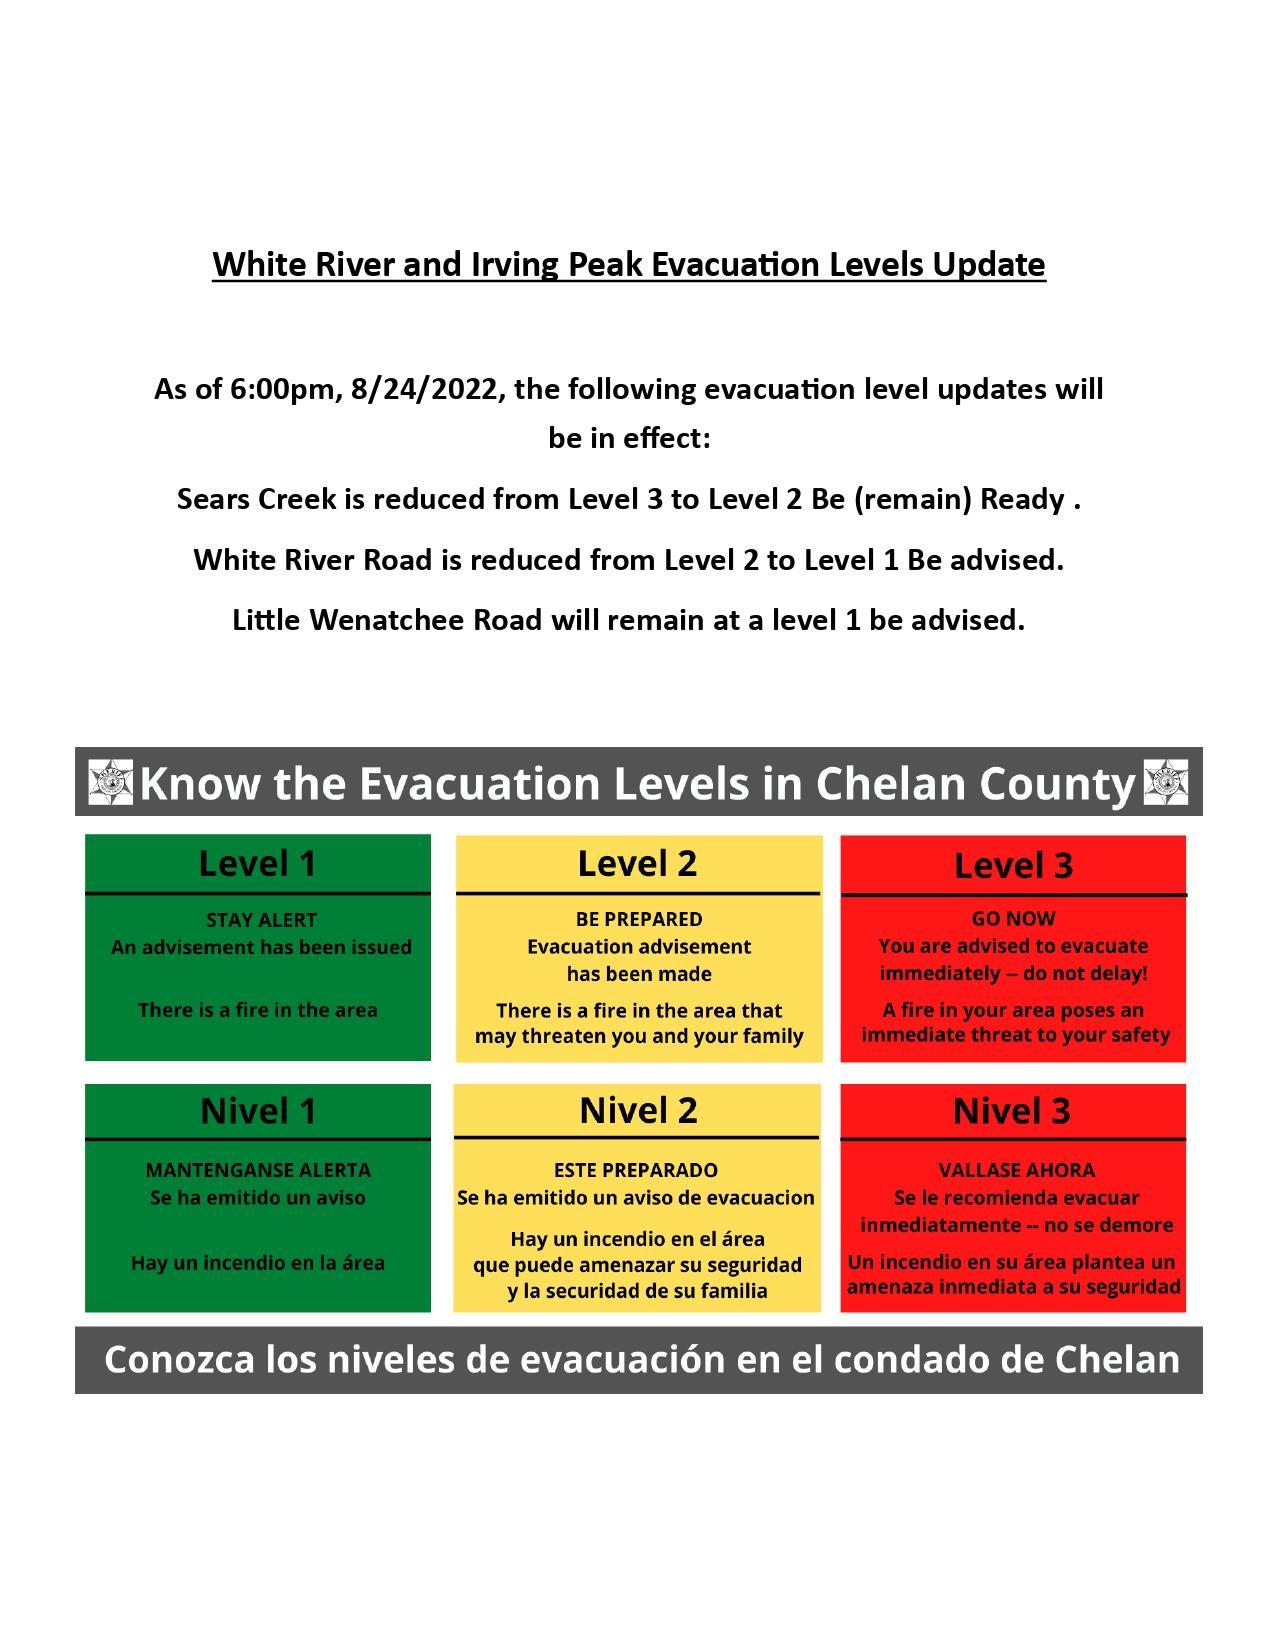 White River and Irving Peak Fires Evacuation Level Update August 24, 2022